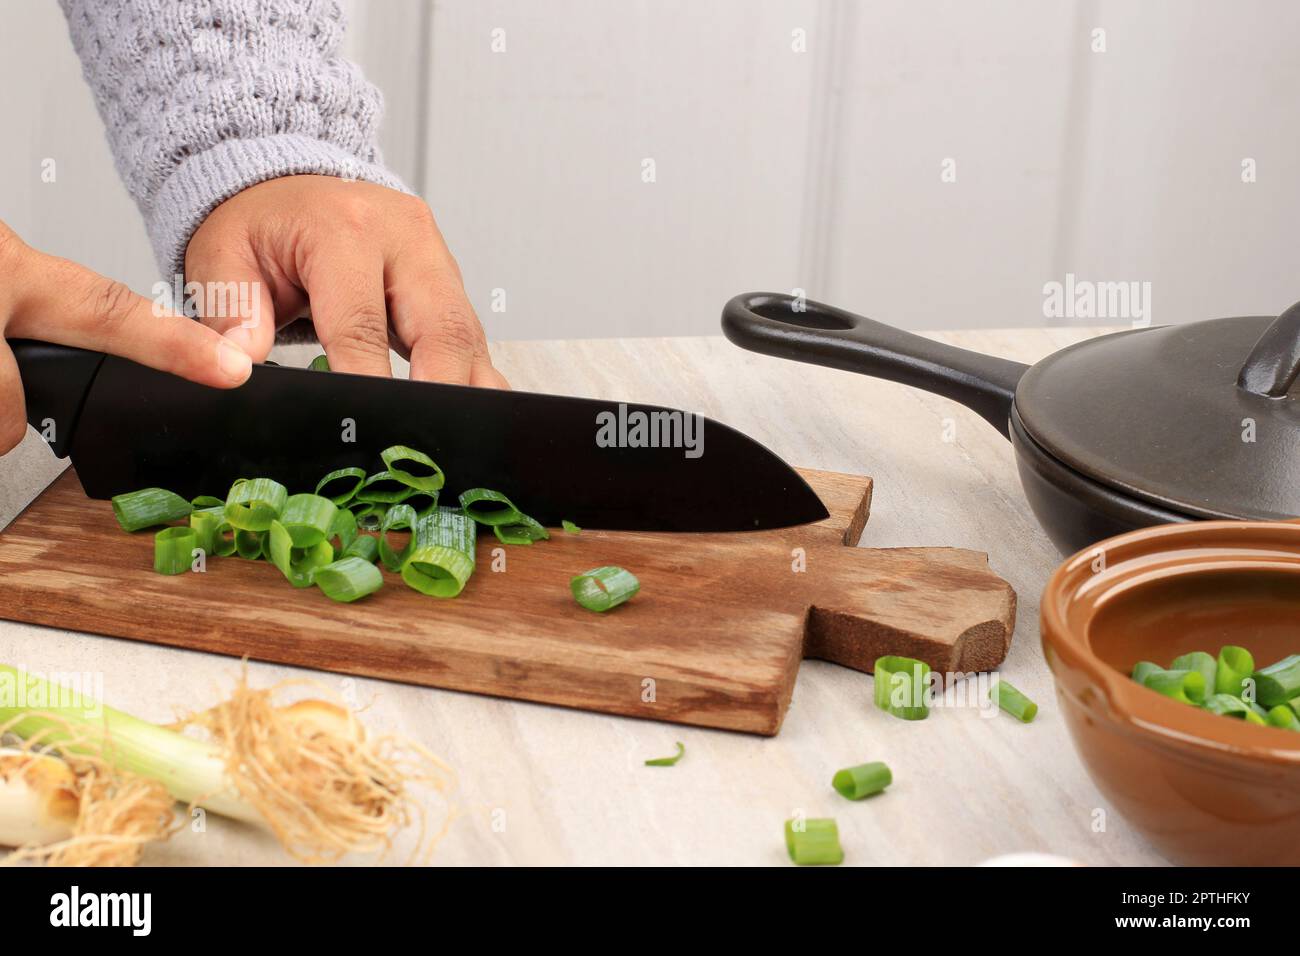 Female Hand Slicing Green Onion on Wooden Choppingboard using Black Knife. Cooking Backstage Stock Photo